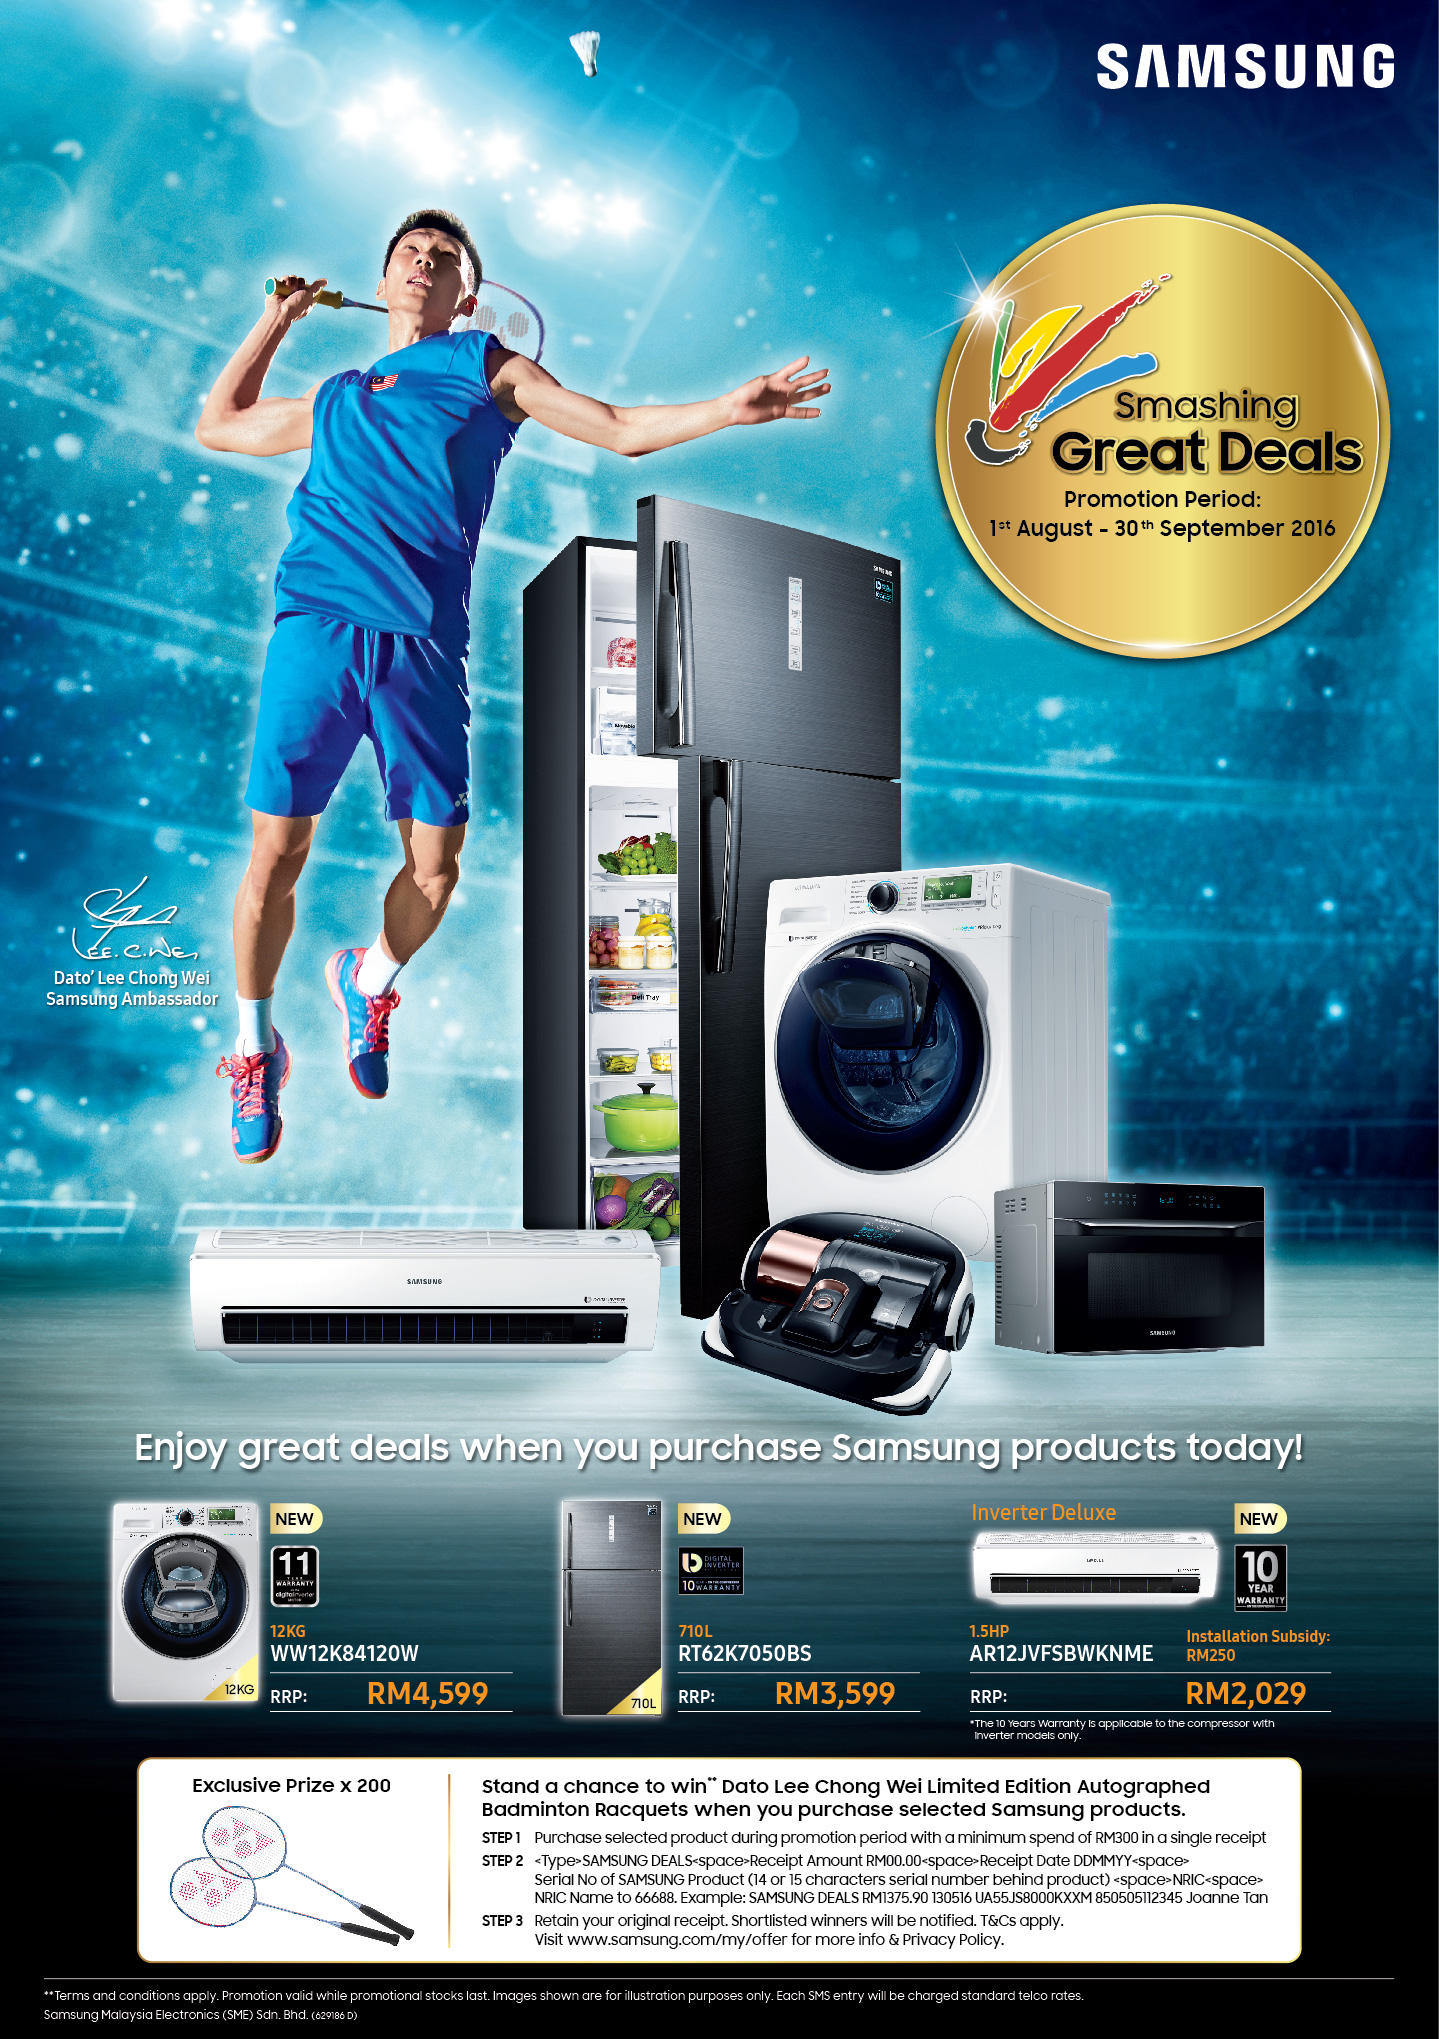 samsung-malaysia-electronics-presents-smashing-great-deals-promotion